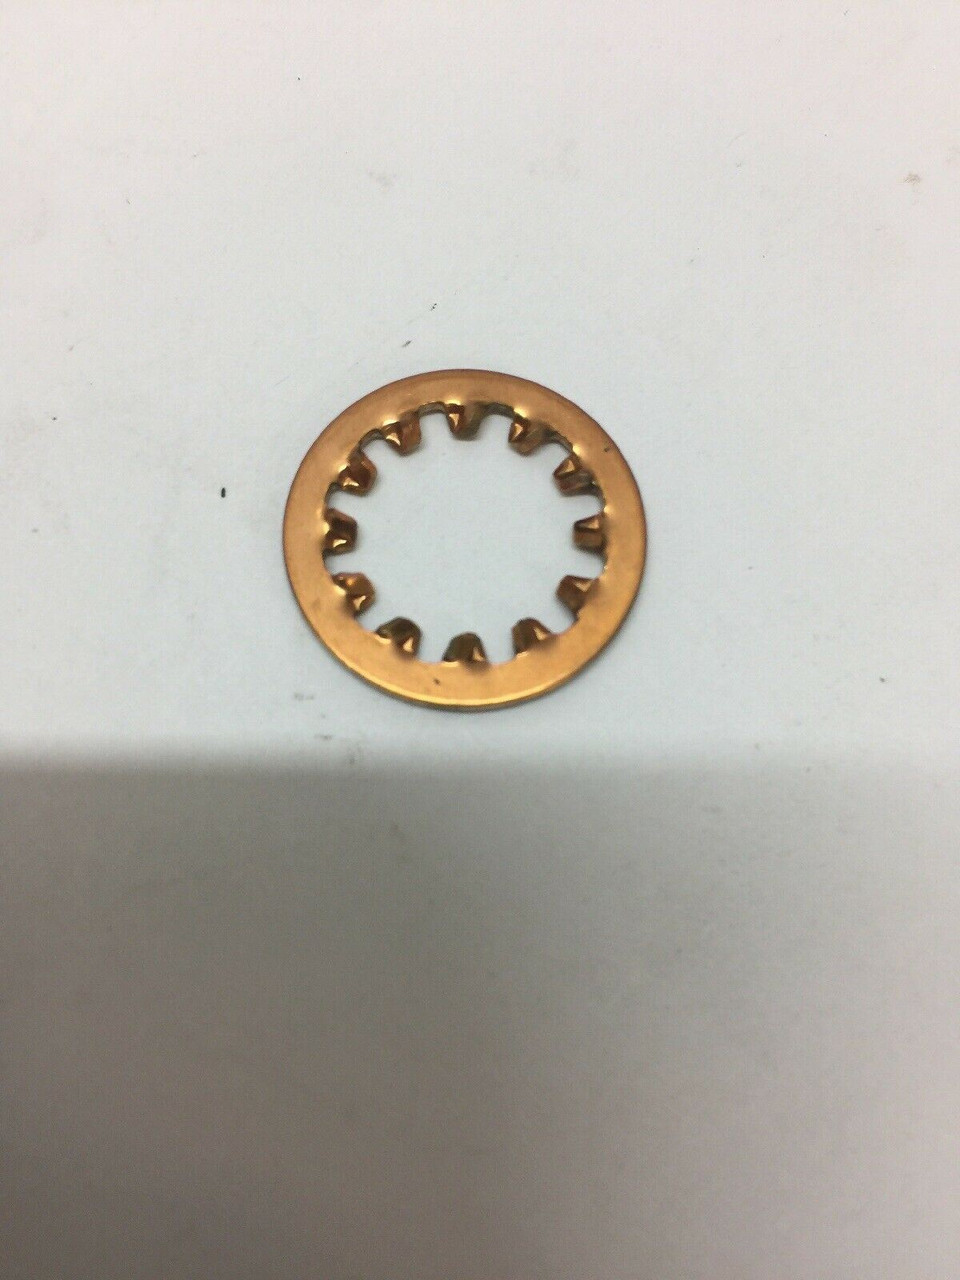 Lock Washer 5310-00-042-4229 Copper Lot of 2